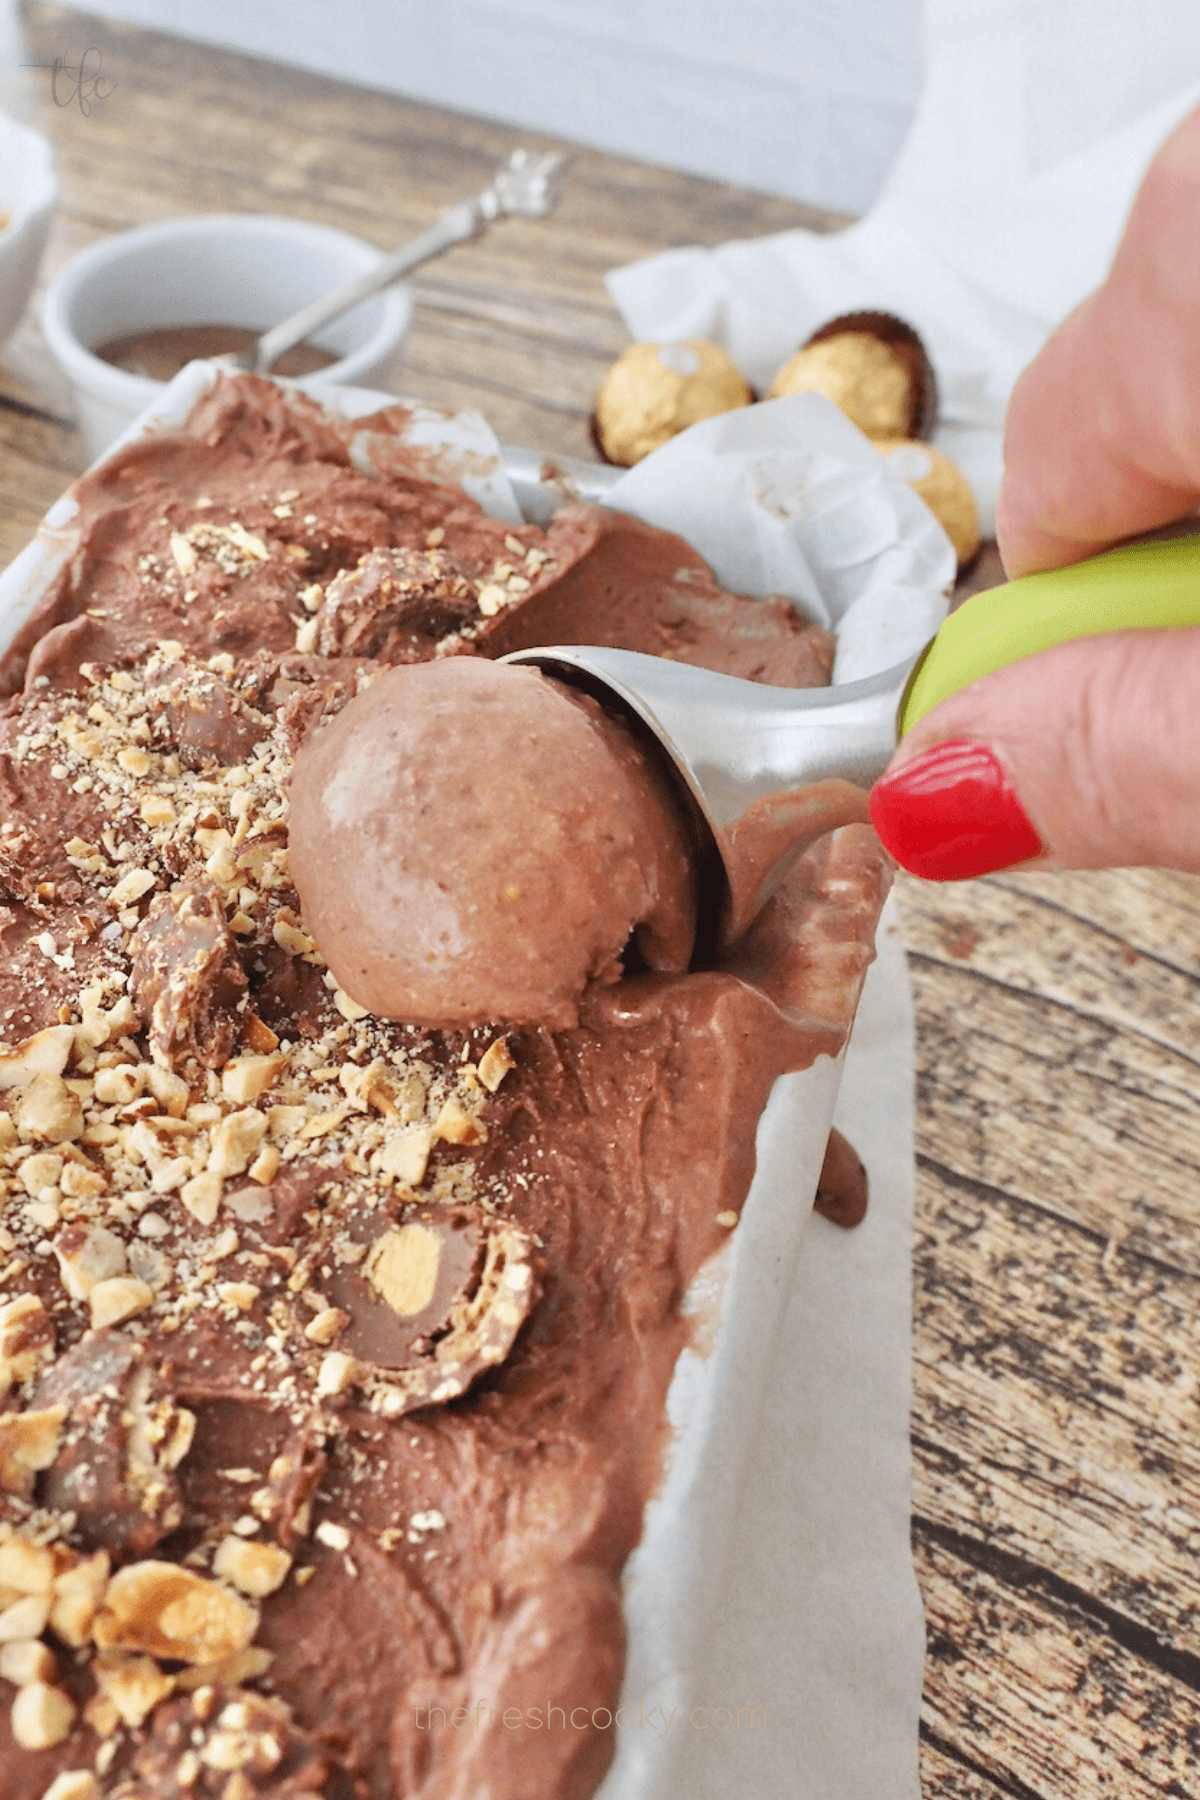 Ferrero Rocher Ice Cream in pan with hand using ice cream scoop and scooping a big scoop to put into a bowl.